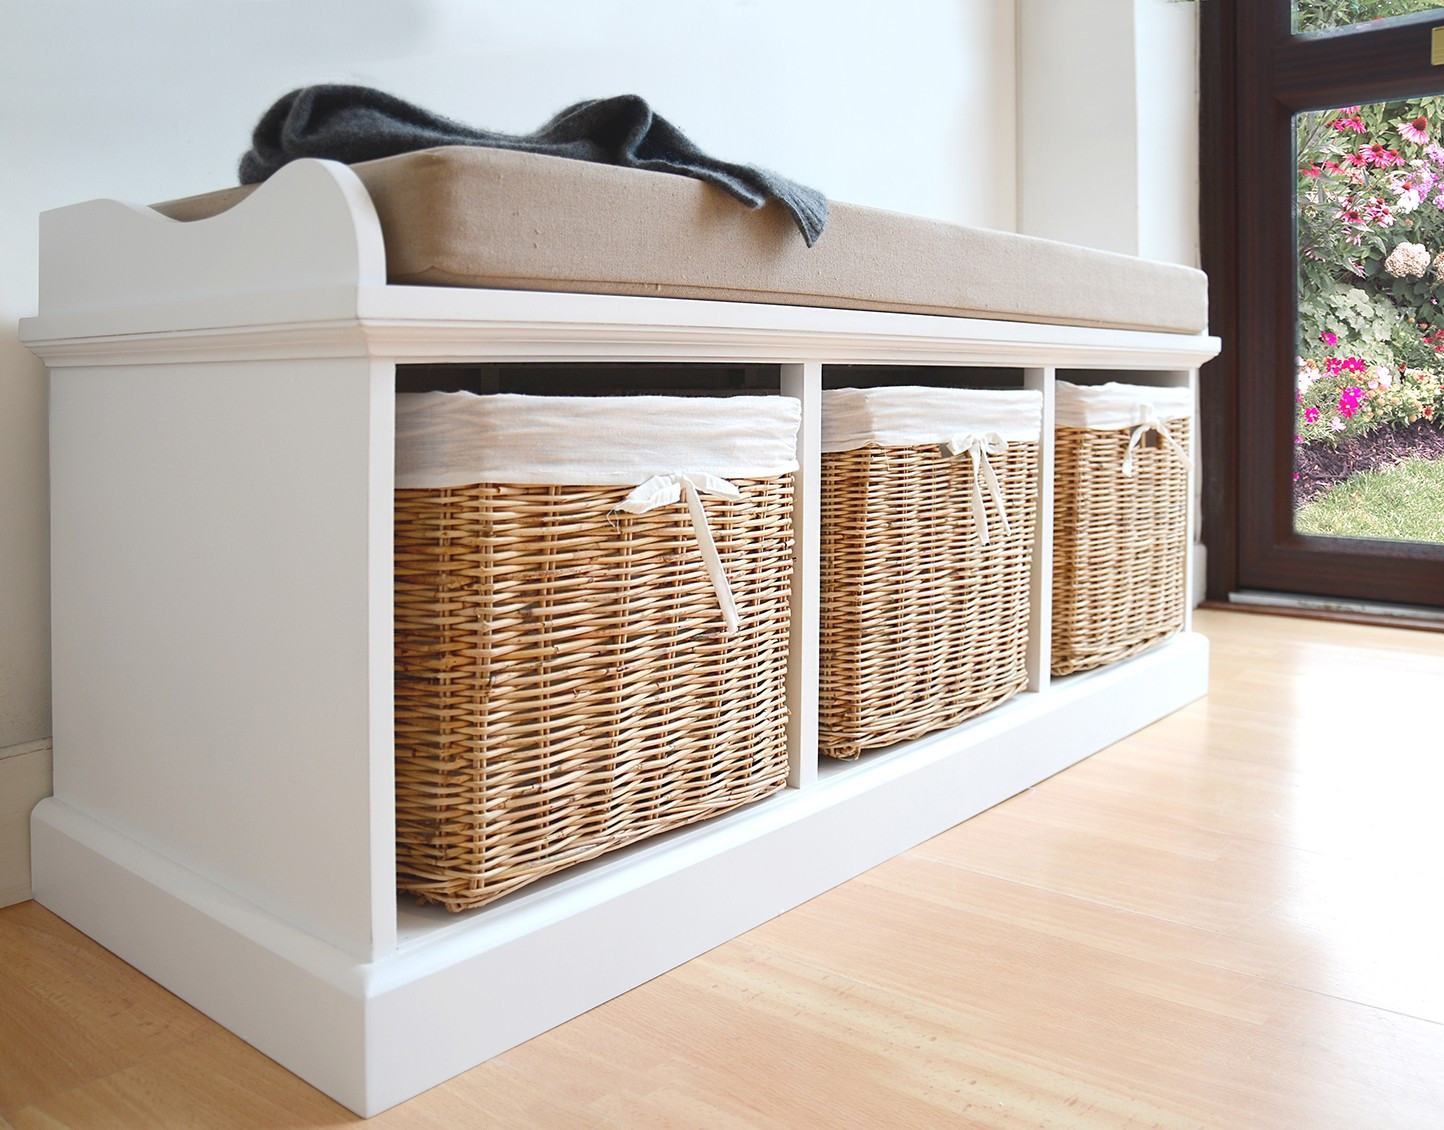 Storage Bench With Baskets
 Tetbury Bench with Cushion and Storage Baskets